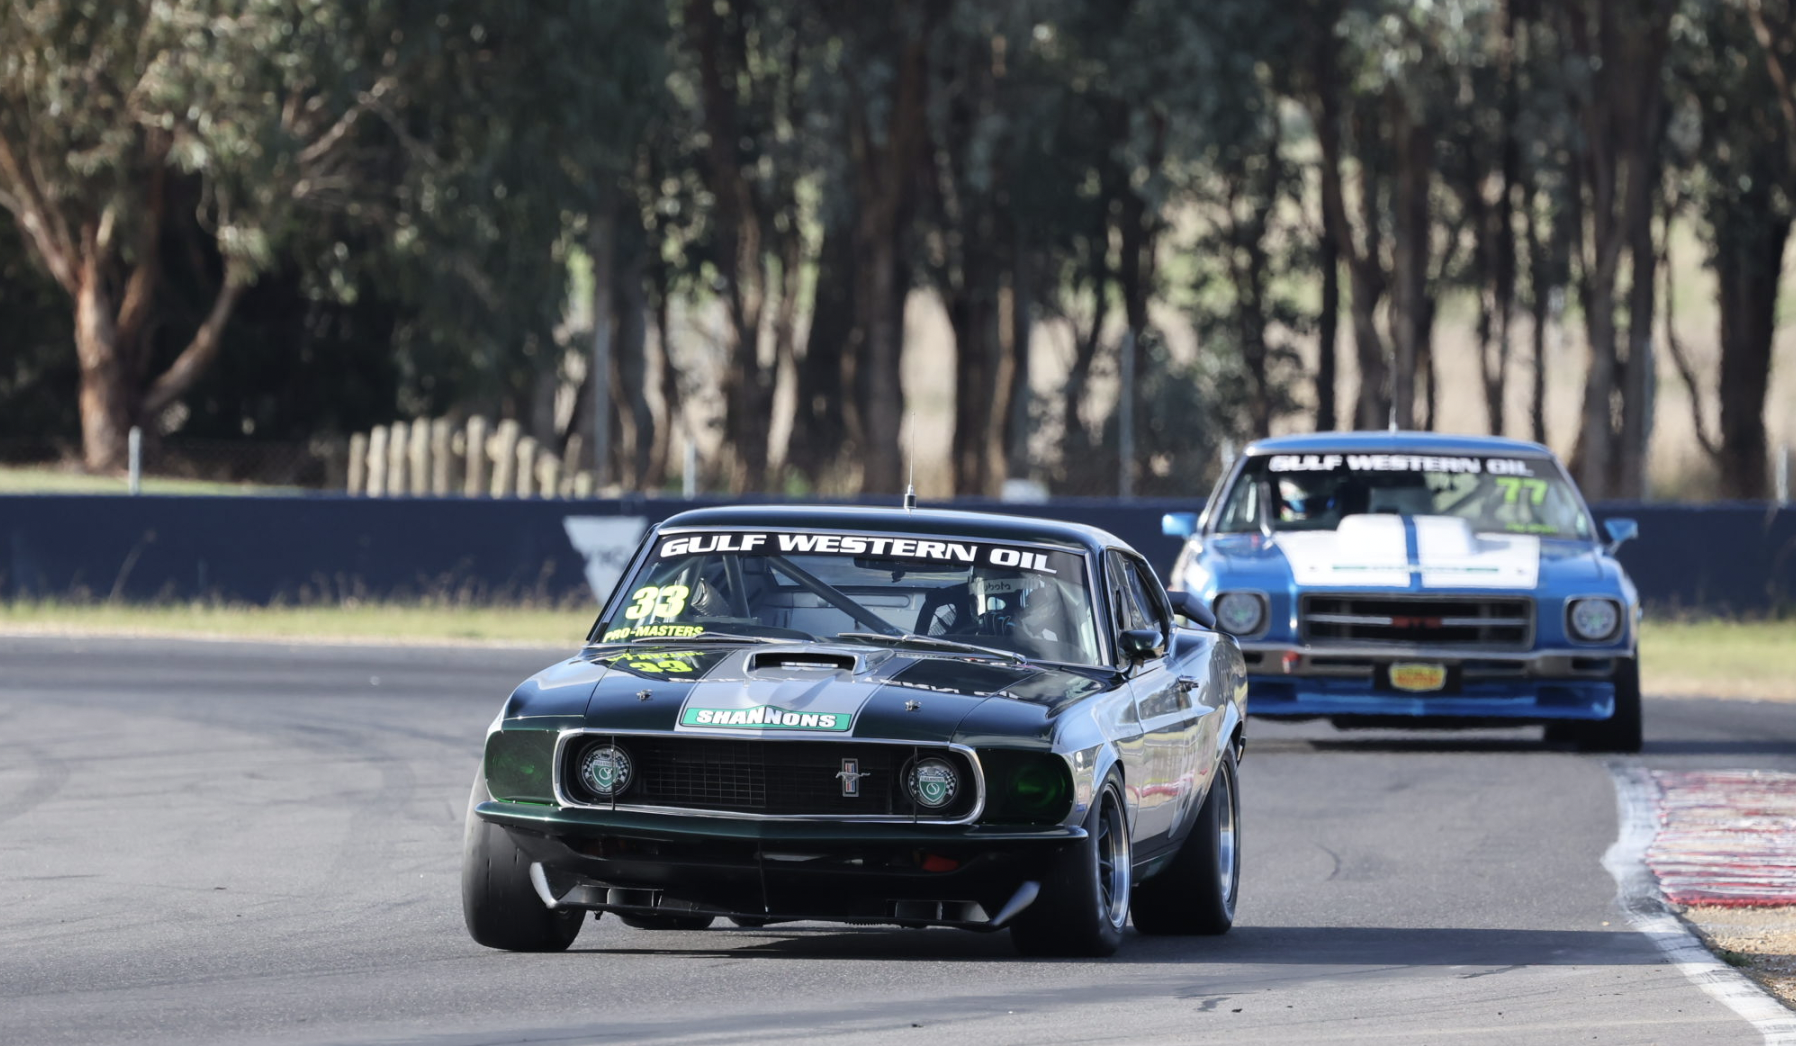 JOHNSON BAGS POLE AHEAD OF BOWE AT WINTON